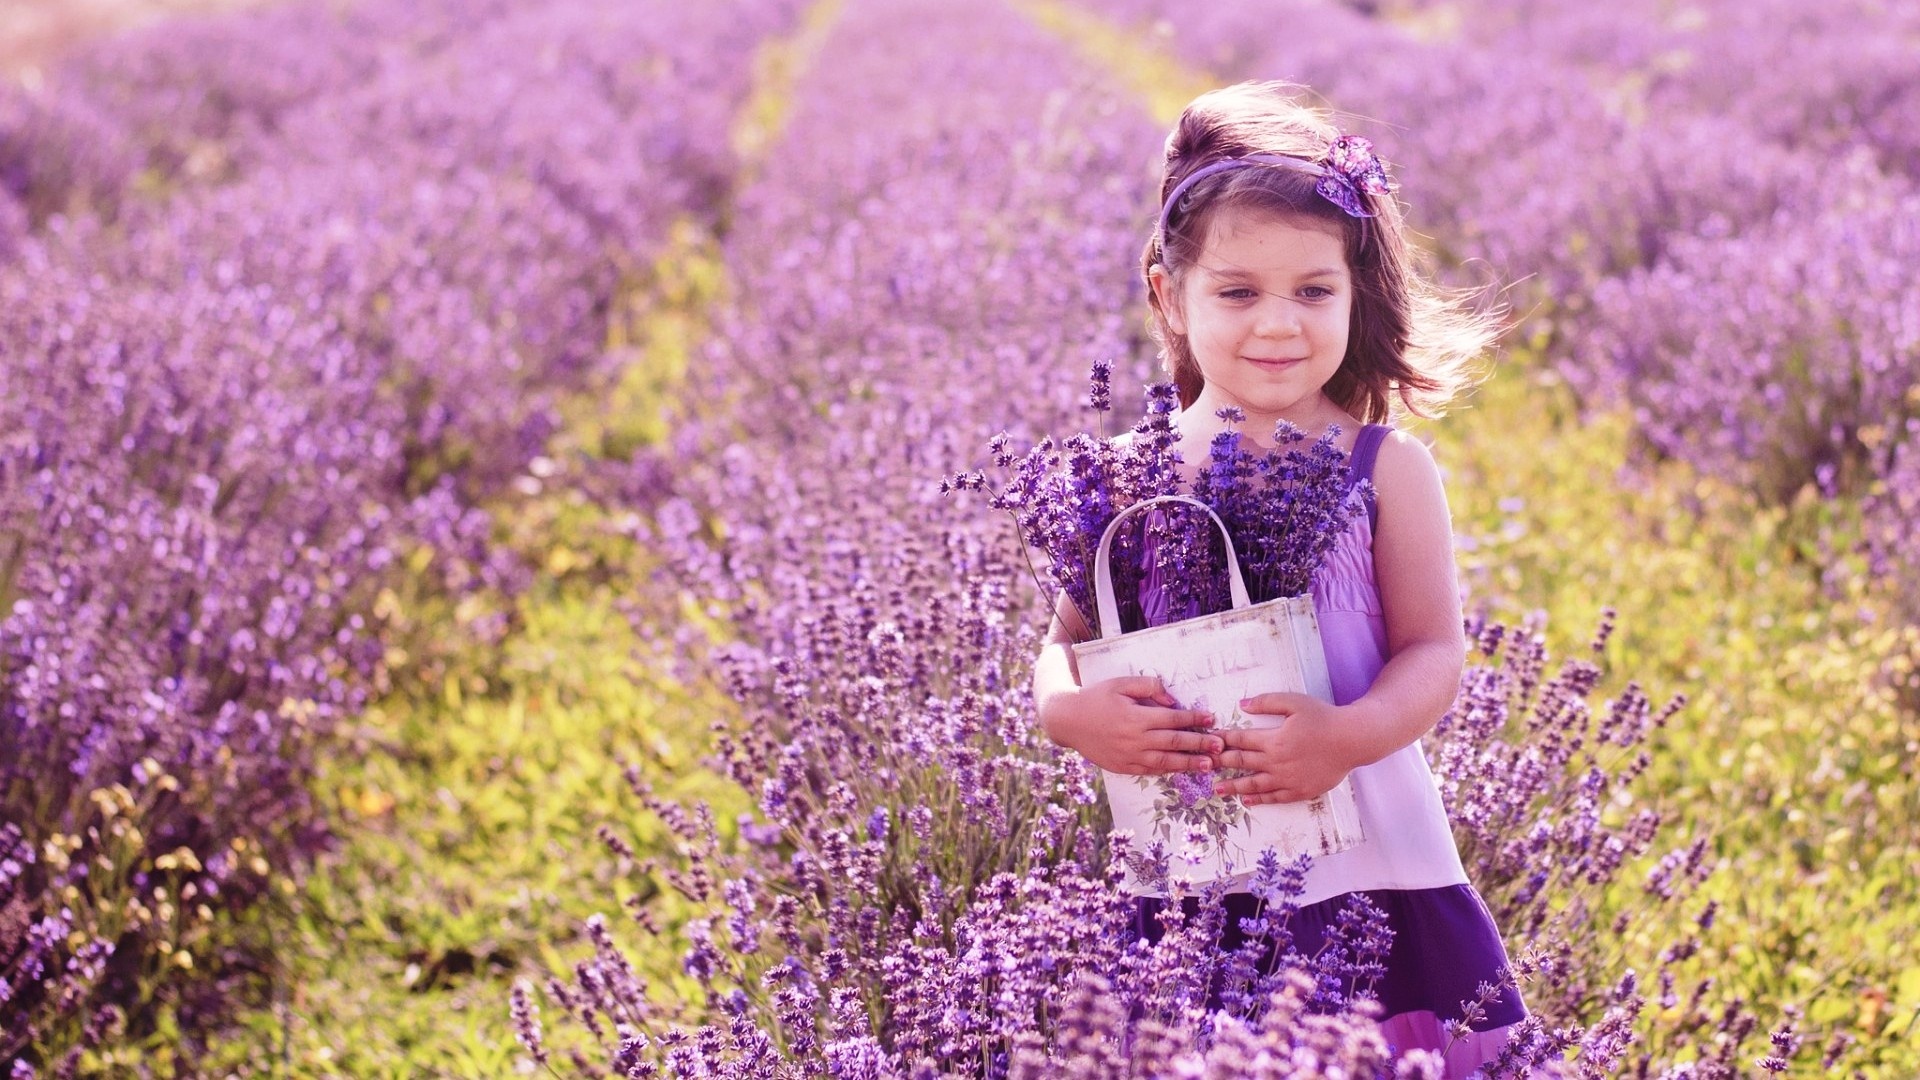 Lavender Flowers Background Wallpaper High Definition High Quality